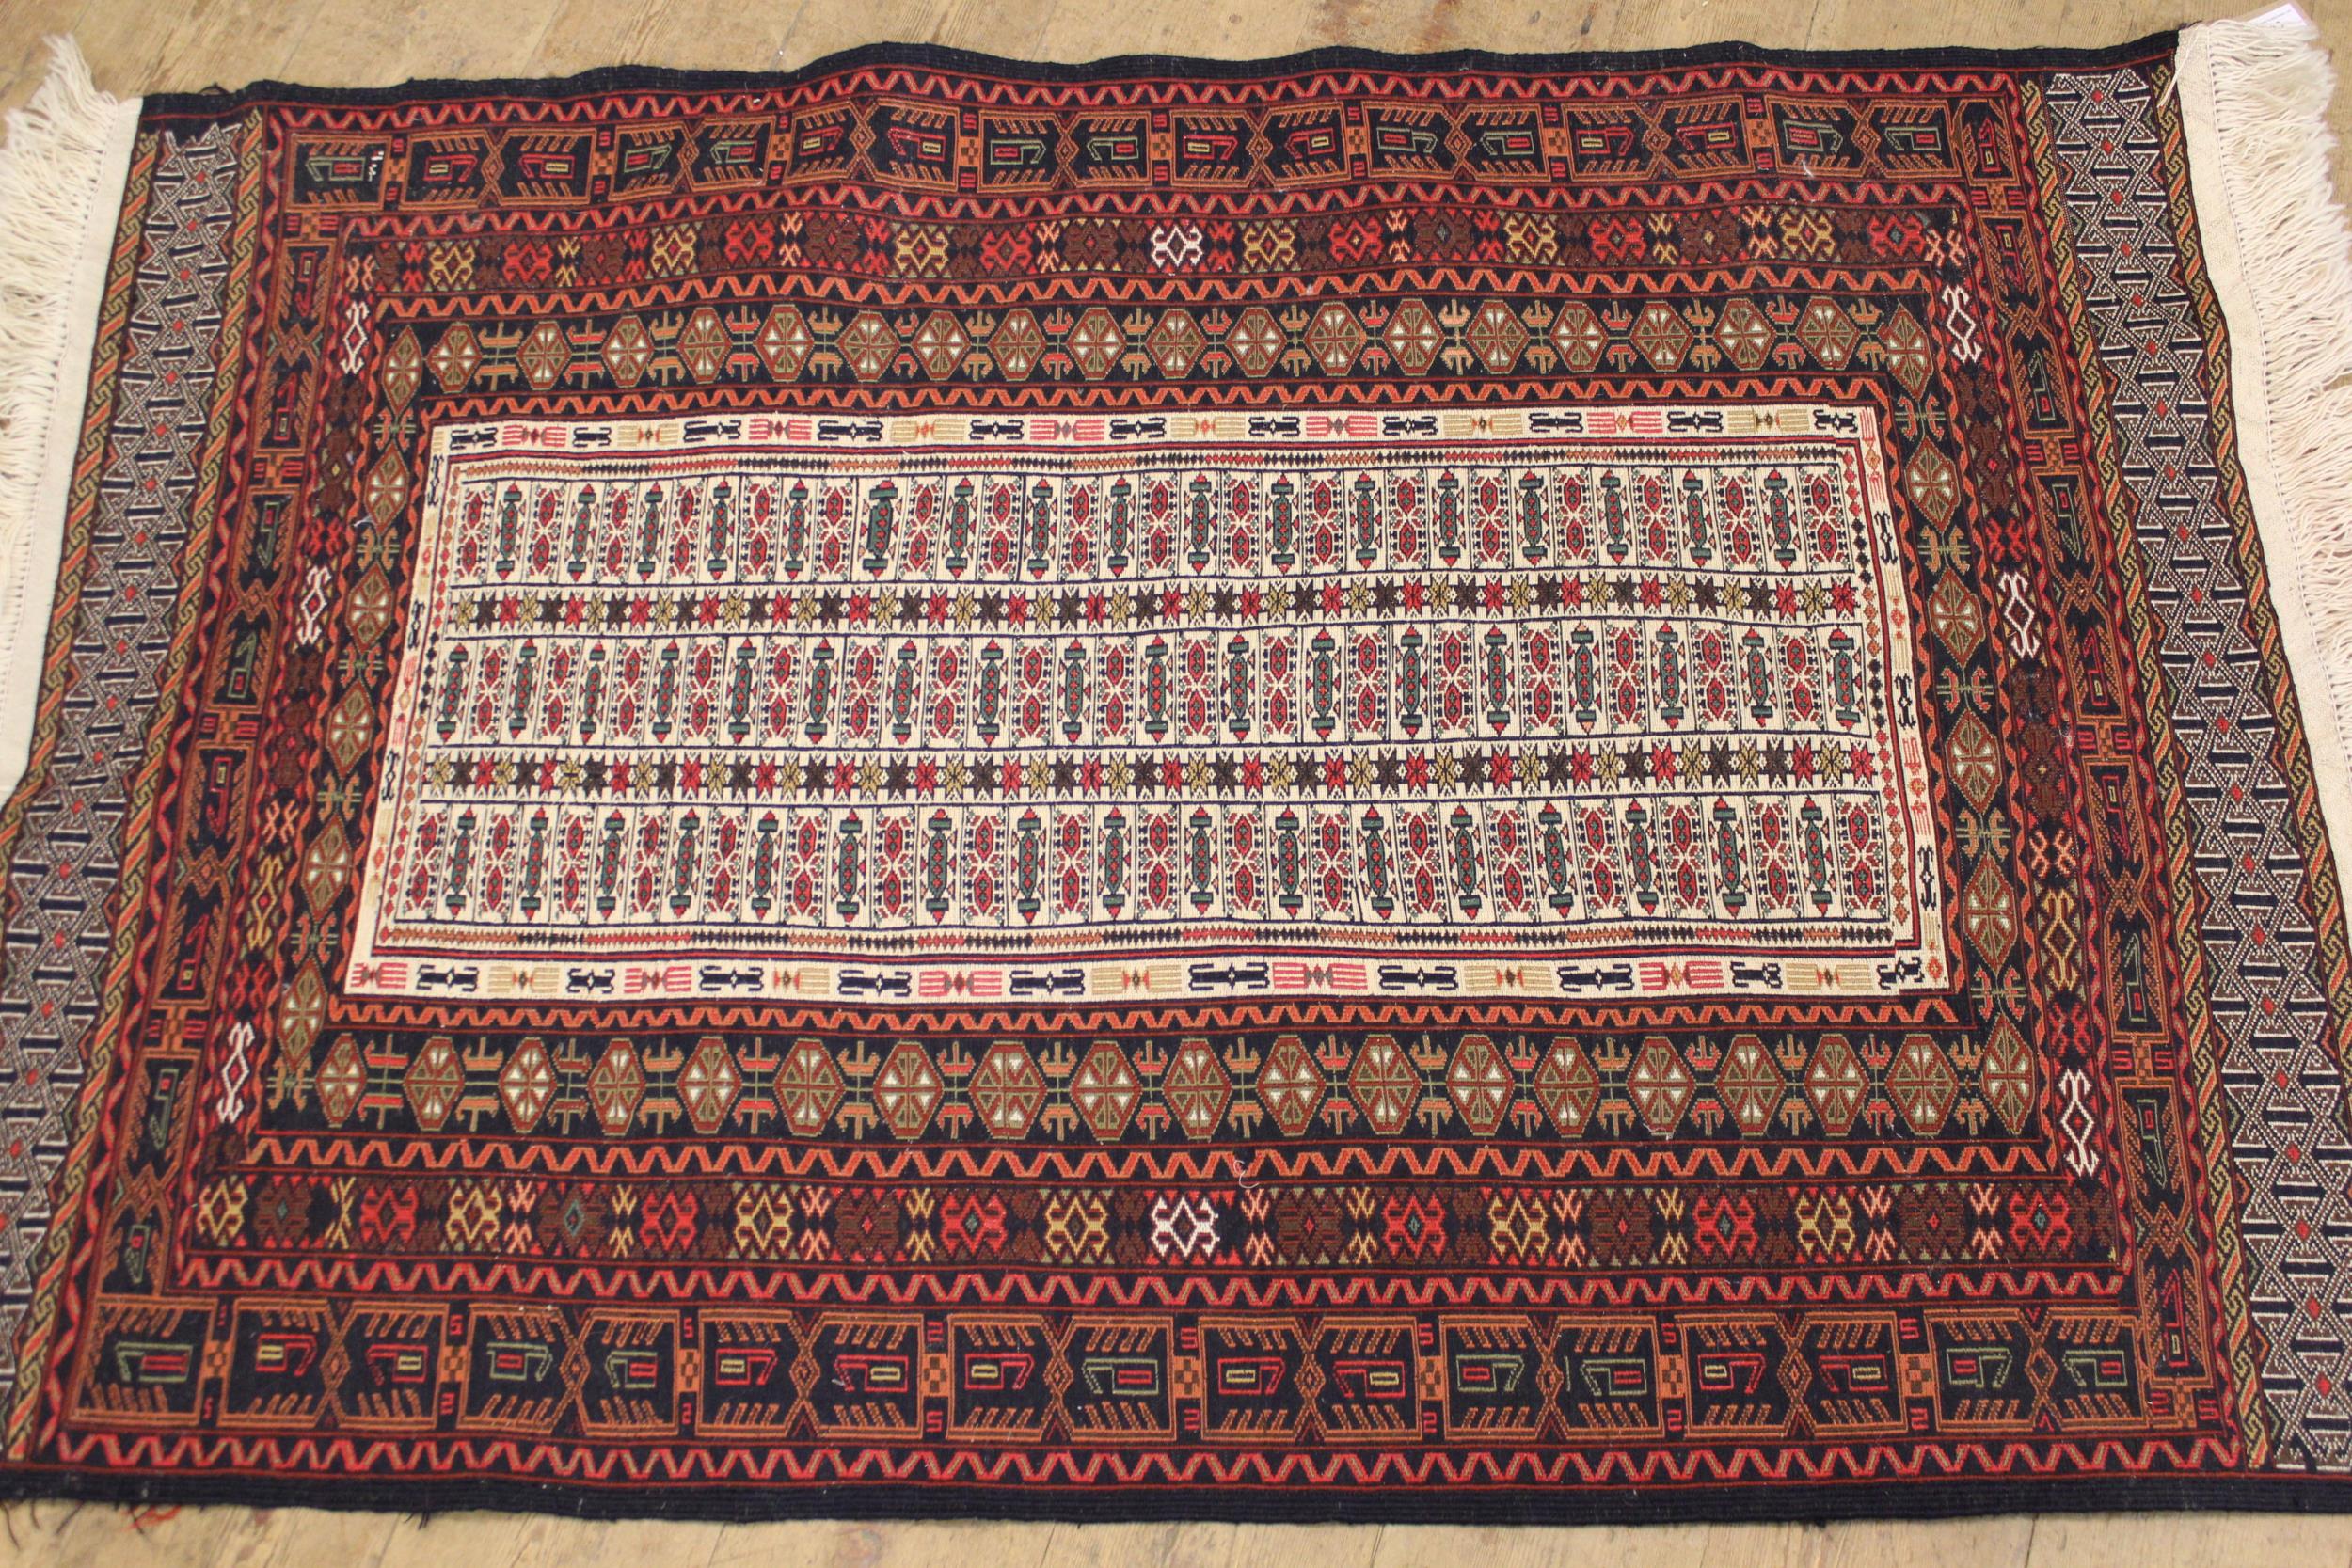 Soumak rug with centre panel and multiple borders on a wine ground, 150 x 94cm